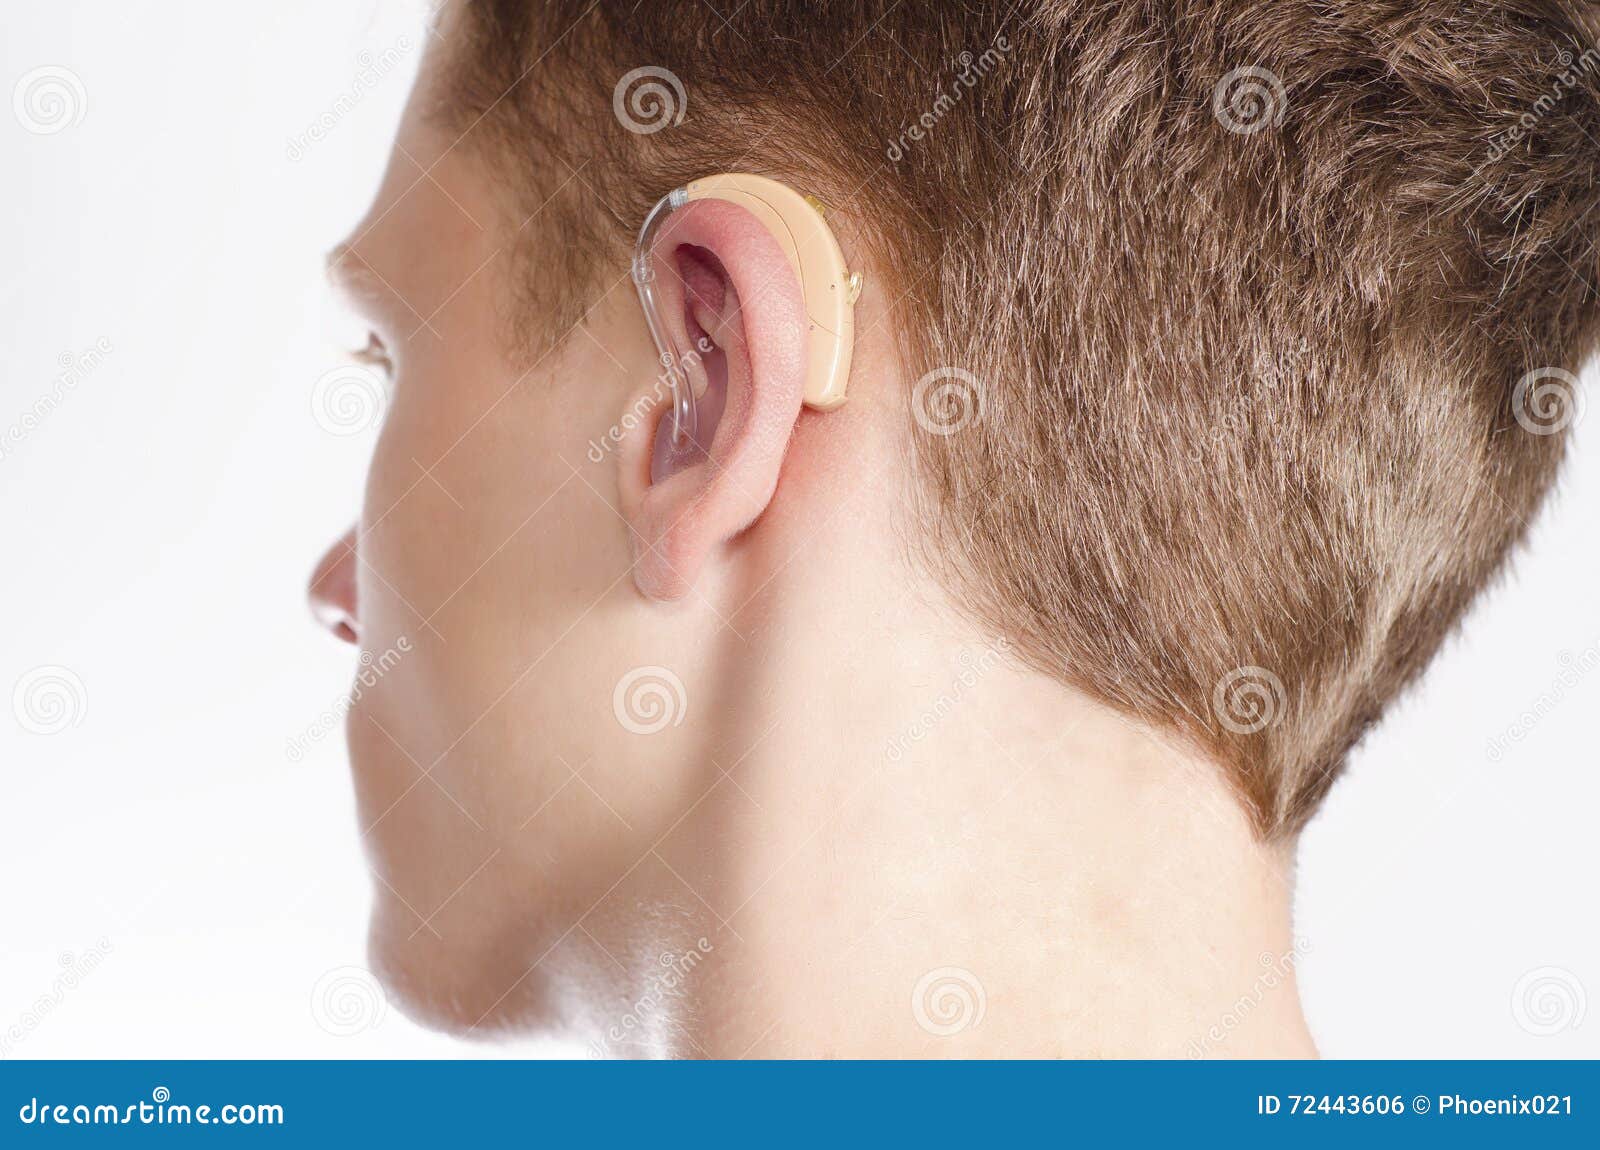 teenager with hearing aid